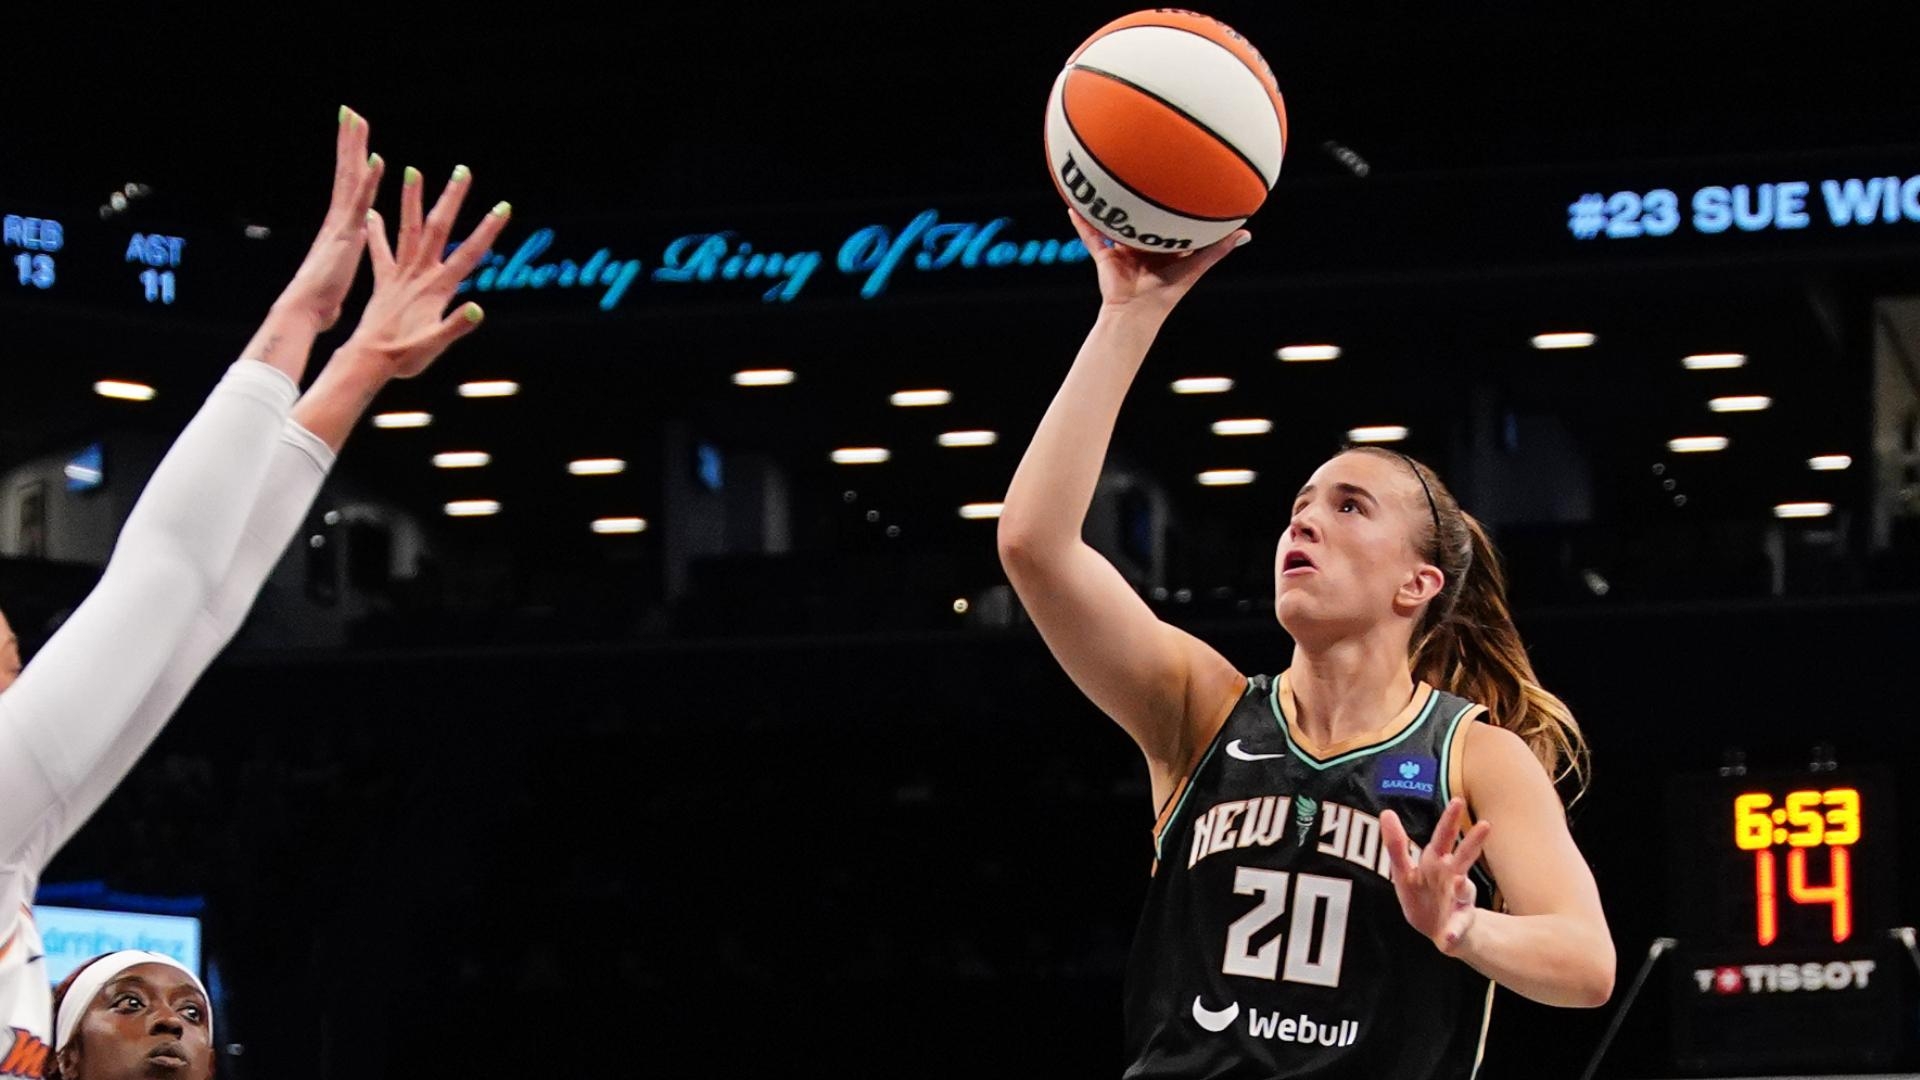 Sabrina Ionescu leads the Liberty to victory with 22 points